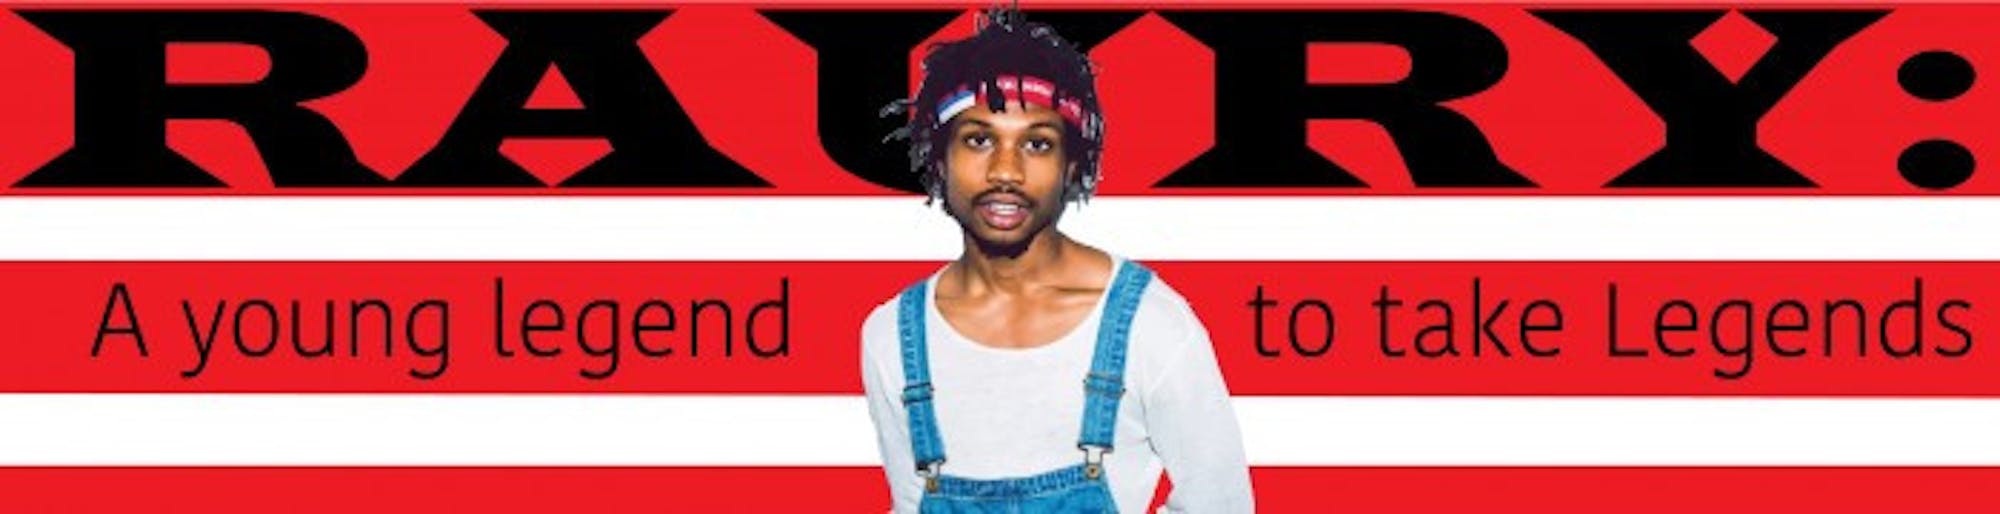 Raury - A Young Legend to Take Legends WEB